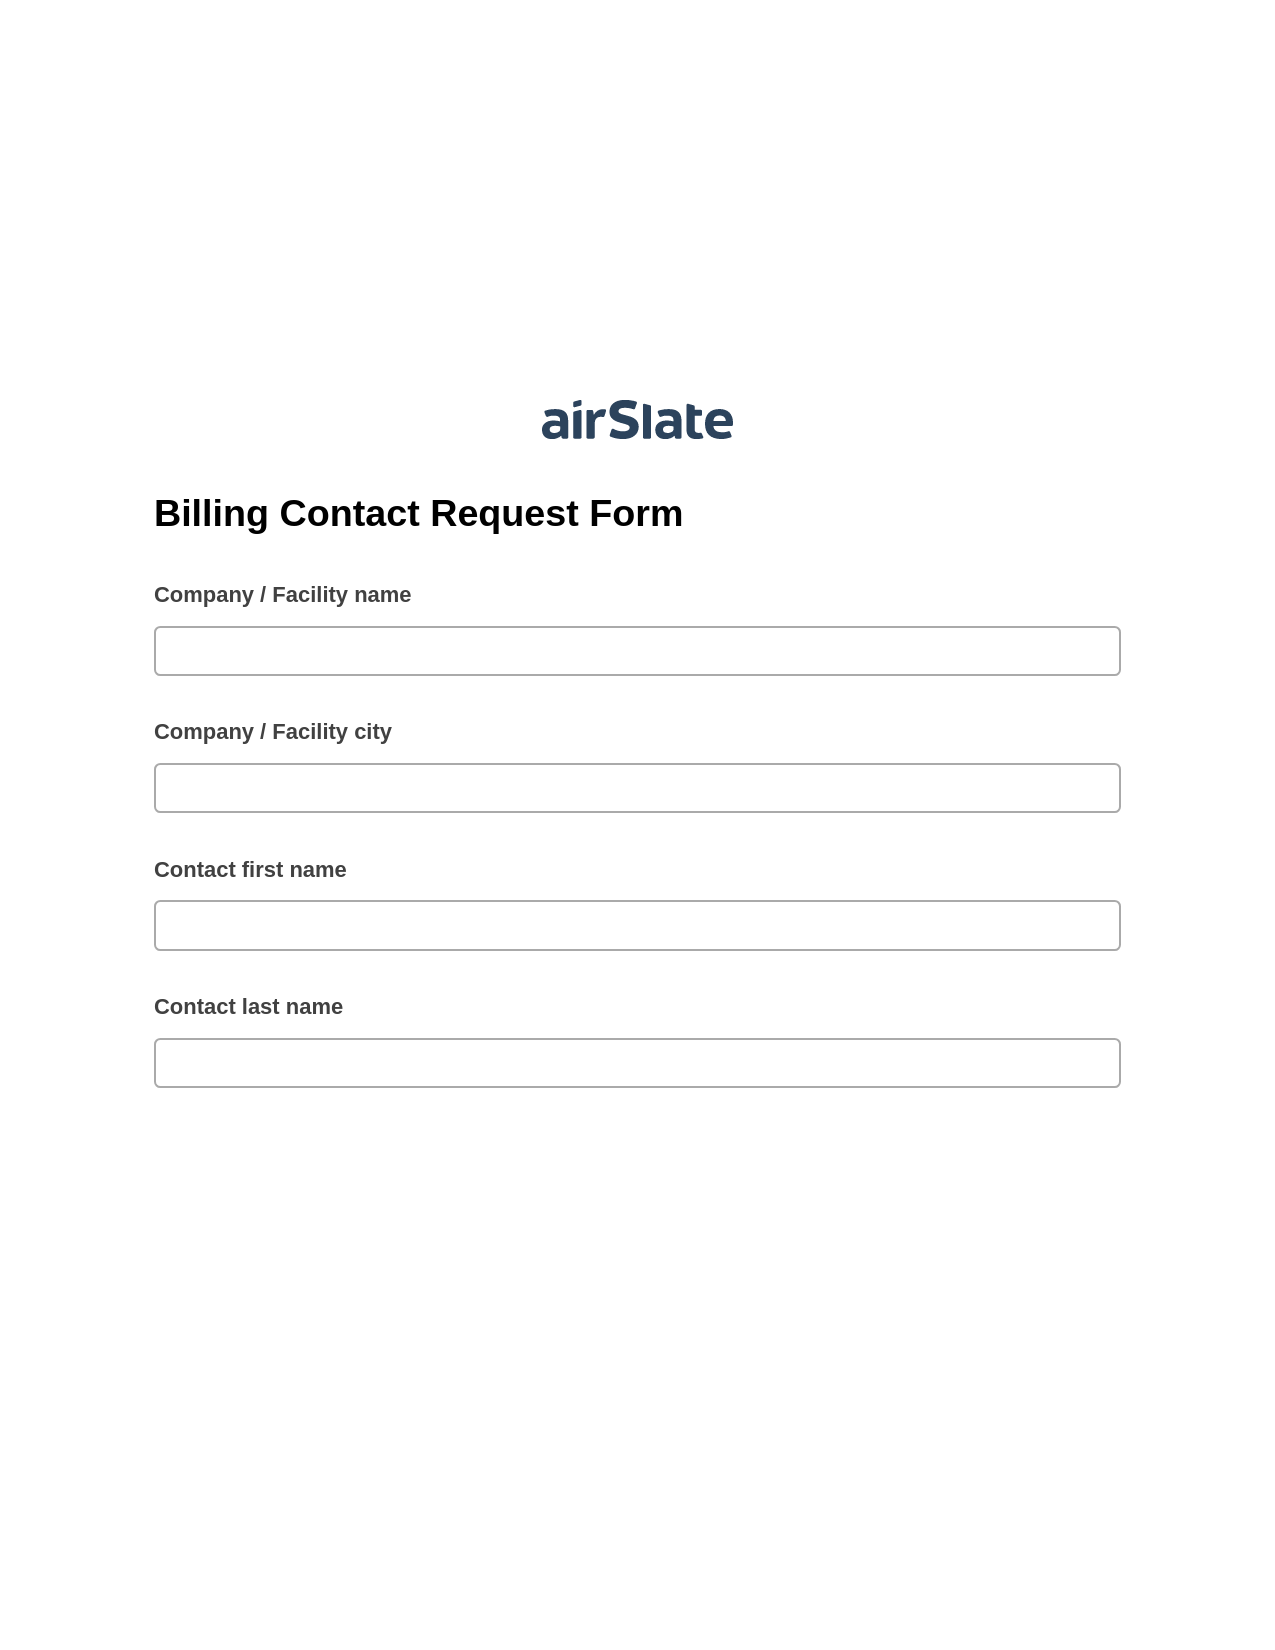 Billing Contact Request Form Pre-fill Document Bot, Audit Trail Bot, Box Bot